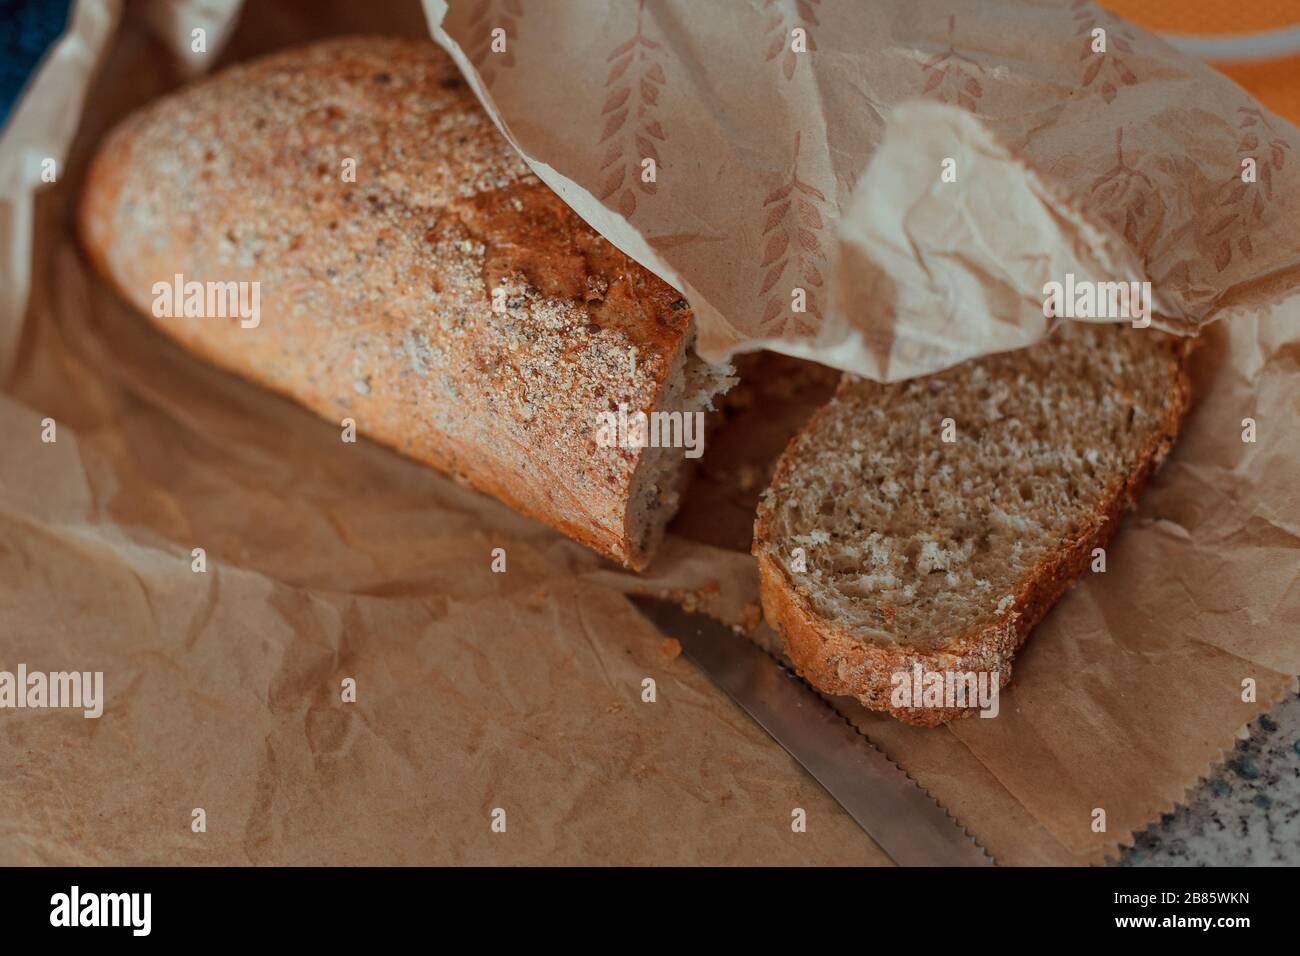 Small loaf of whole grain bread with one piece cut off with a knife Stock Photo